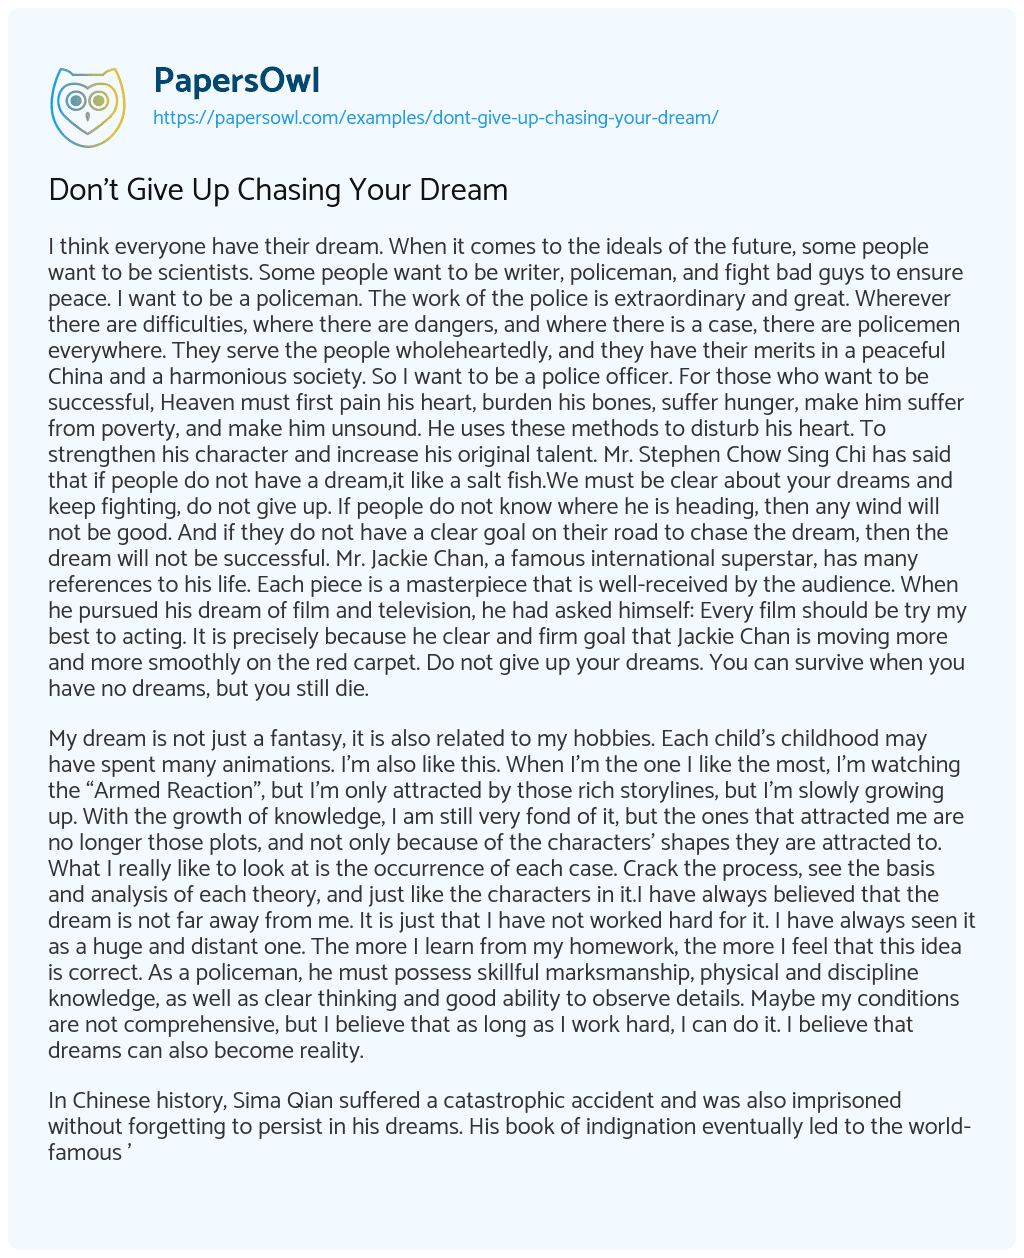 Essay on Don’t Give up Chasing your Dream